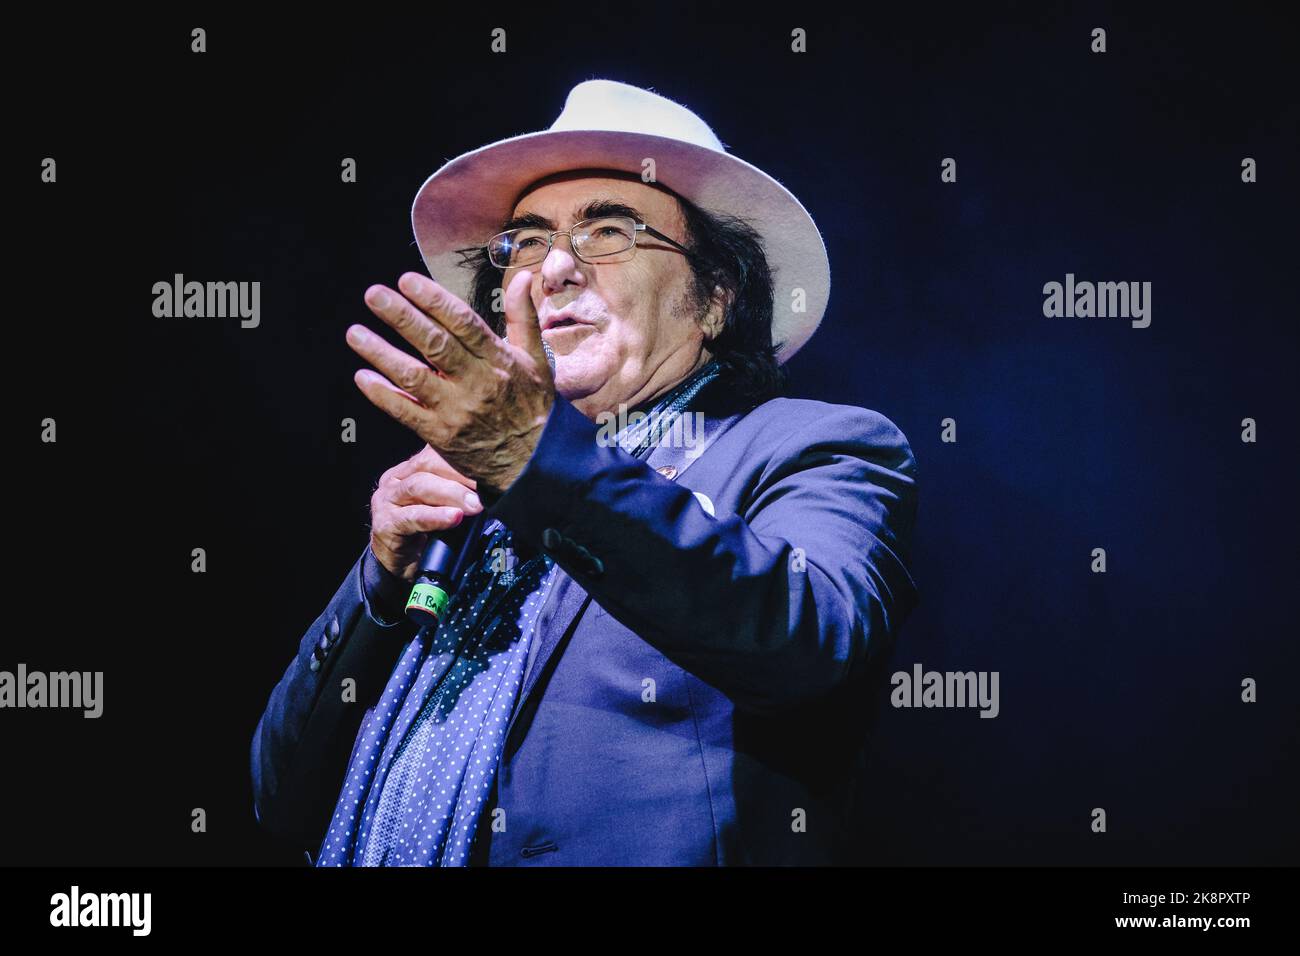 Al bano antonio carrisi hi-res stock photography and images - Alamy